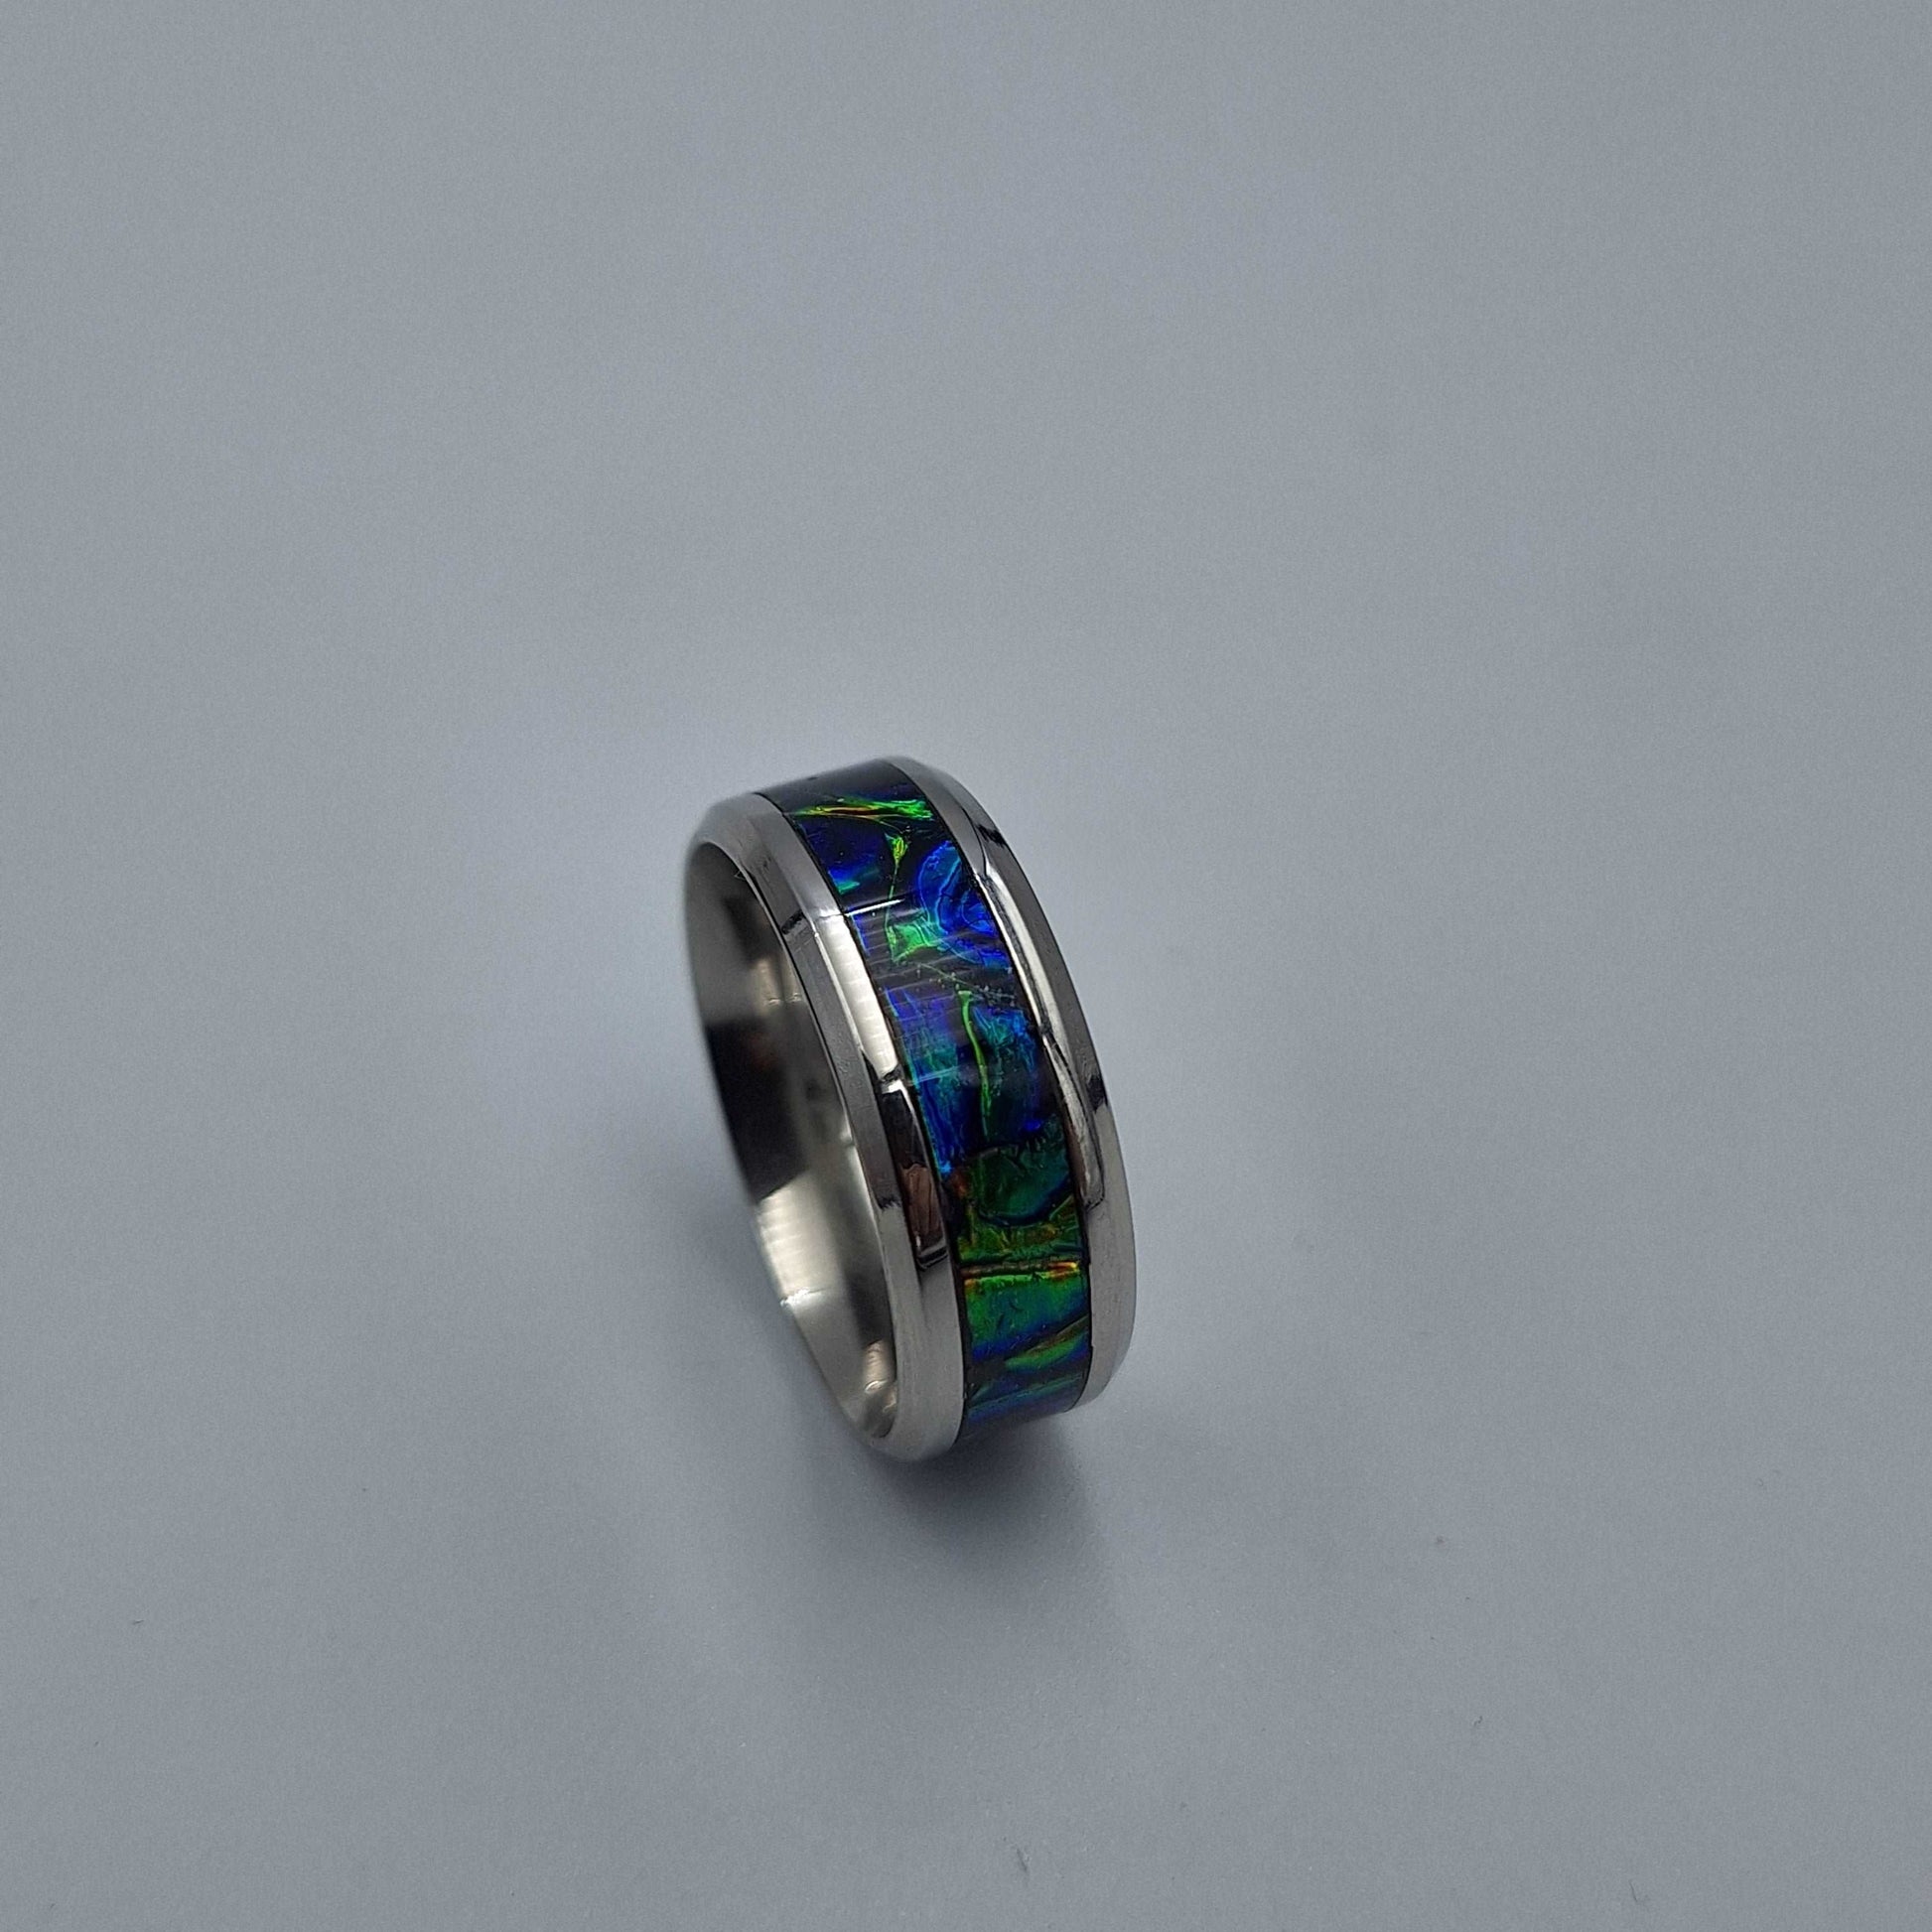 Stainless Steel 8mm Ring With Dichrolam Laminate - Size 7